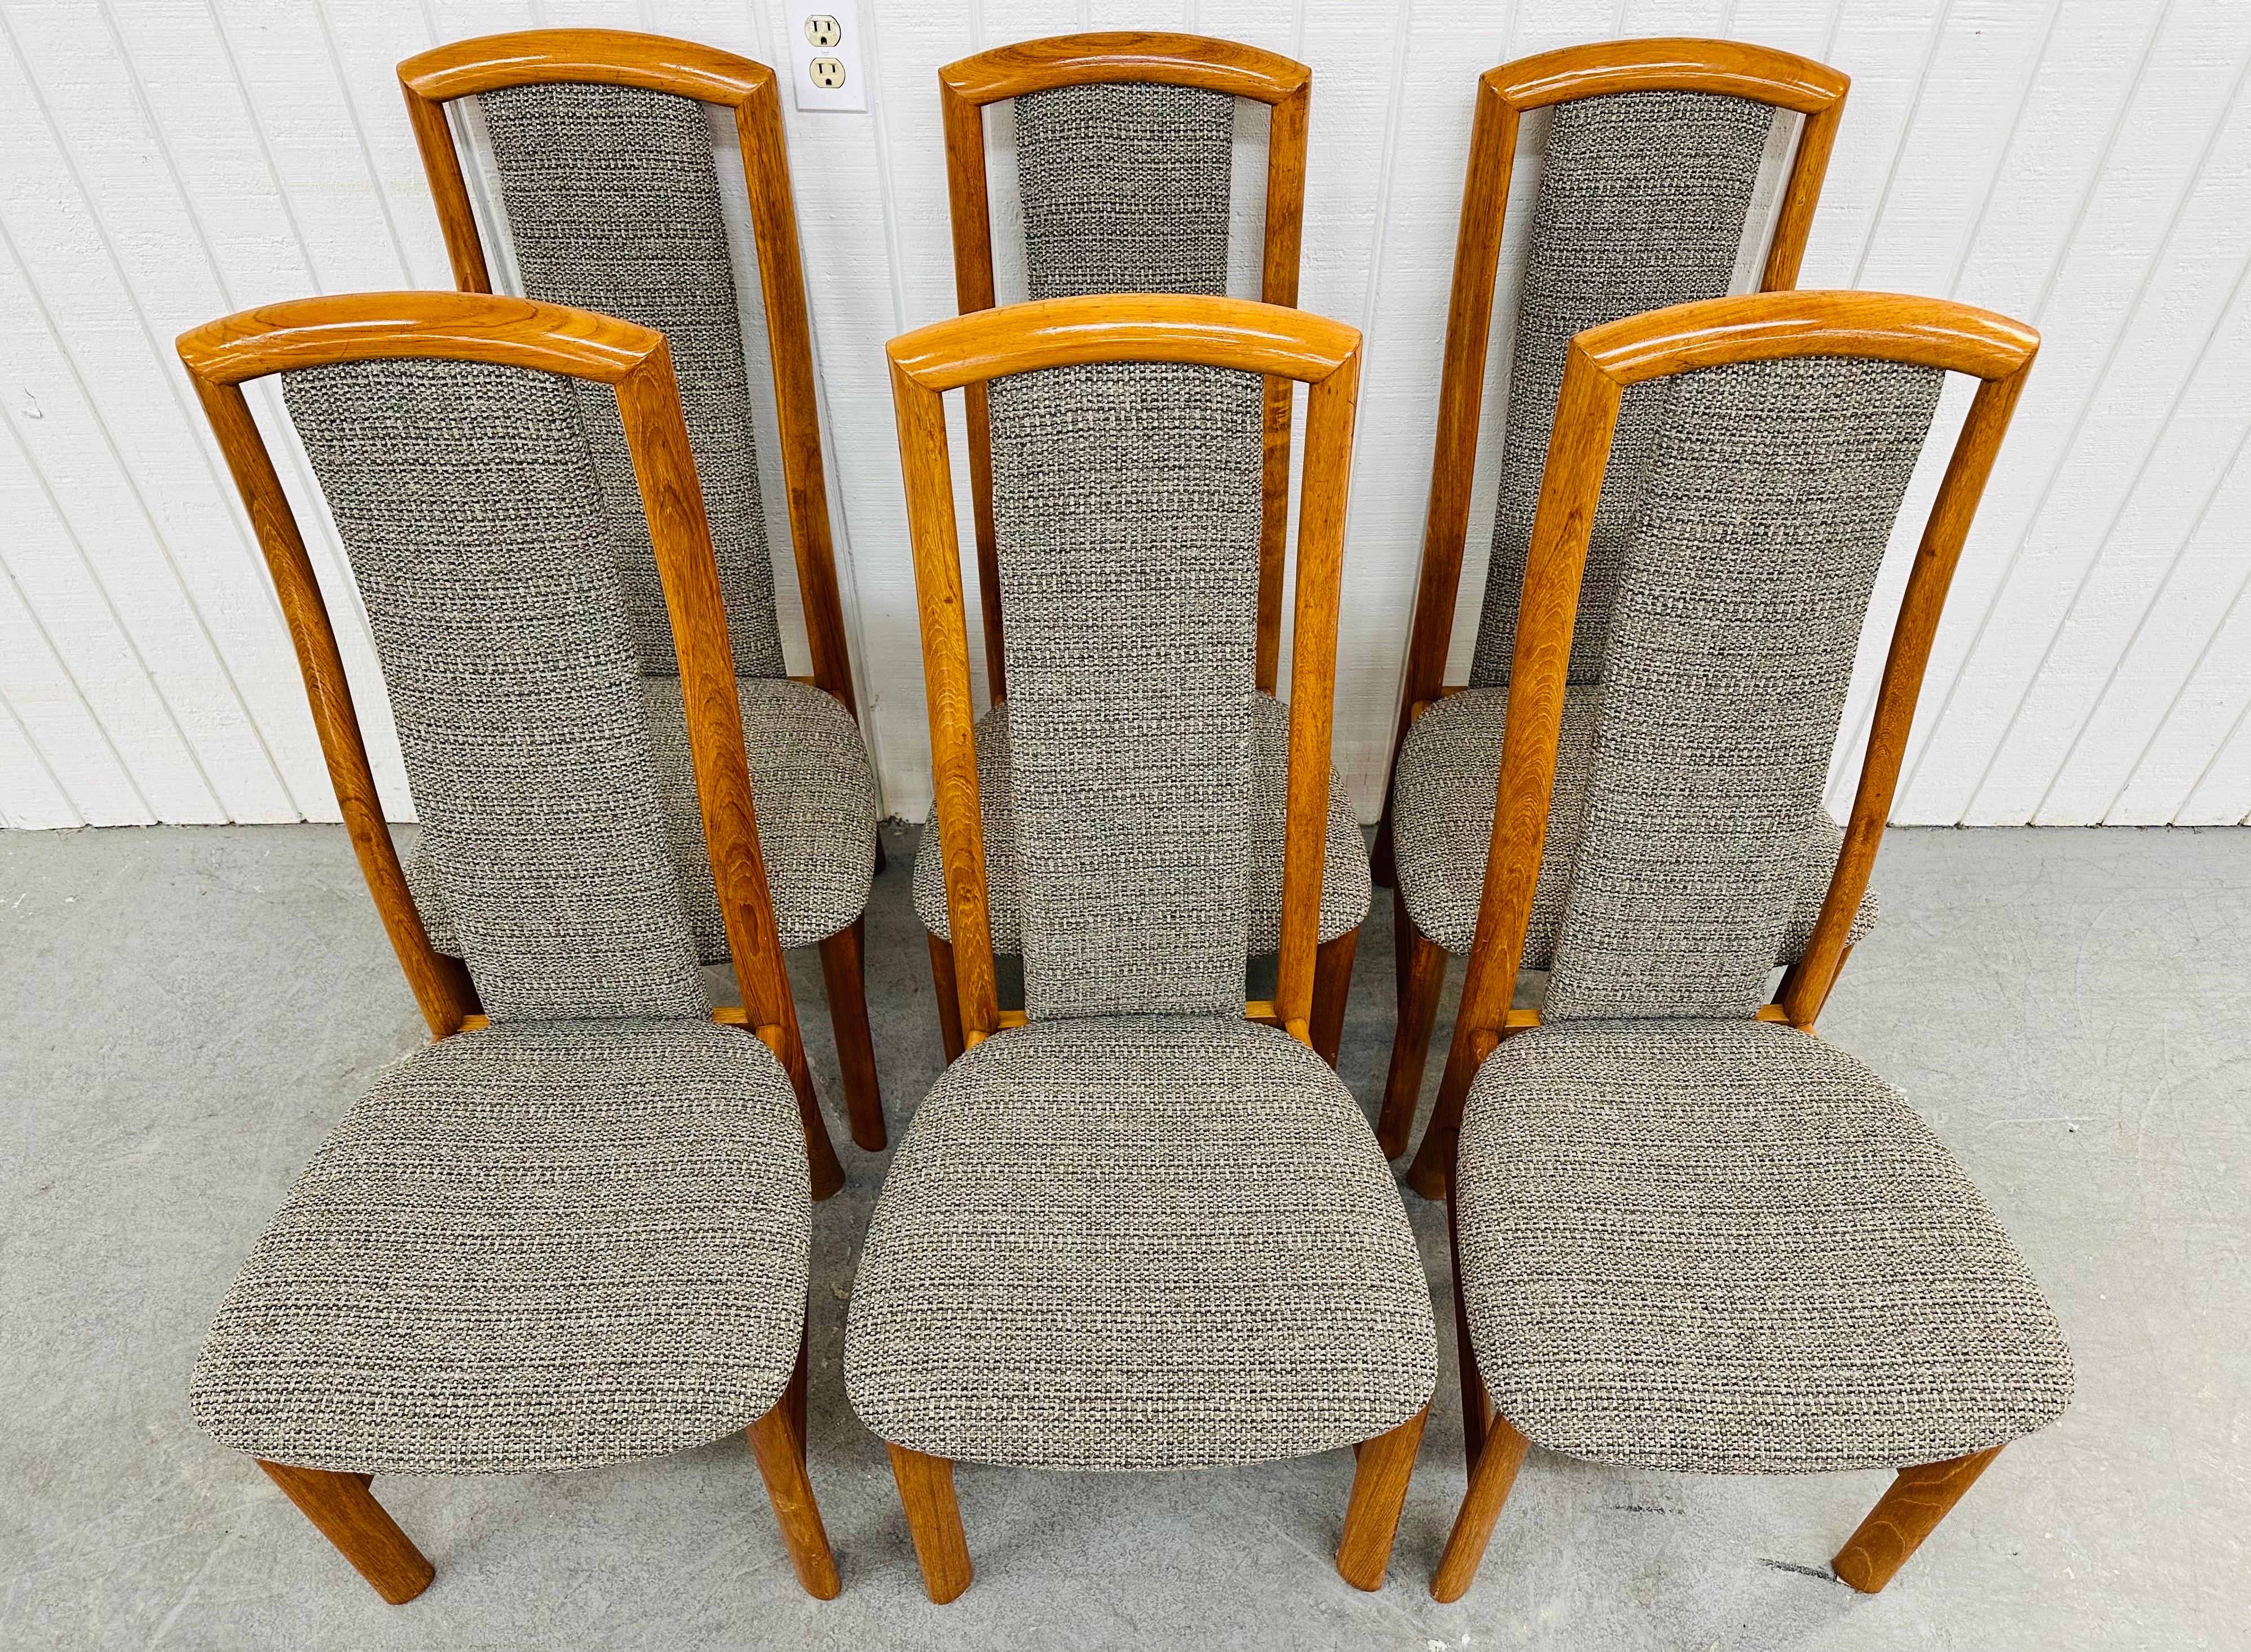 Vintage Danish Modern Teak Dining Chairs - Set of 6 In Good Condition For Sale In Clarksboro, NJ